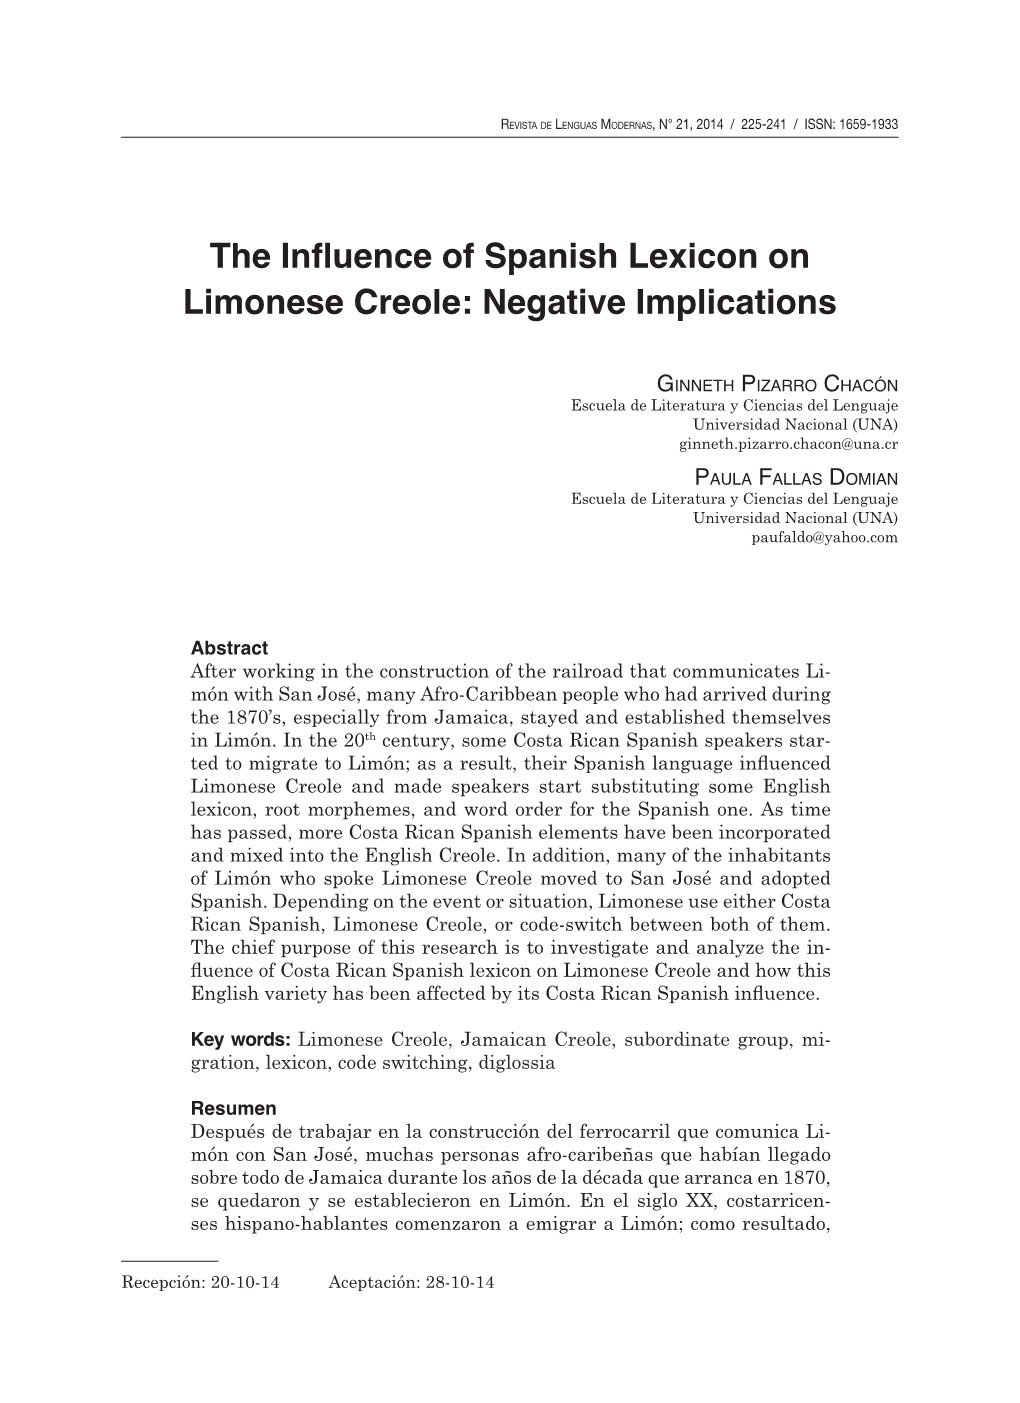 The Influence of Spanish Lexicon on Limonese Creole: Negative Implications